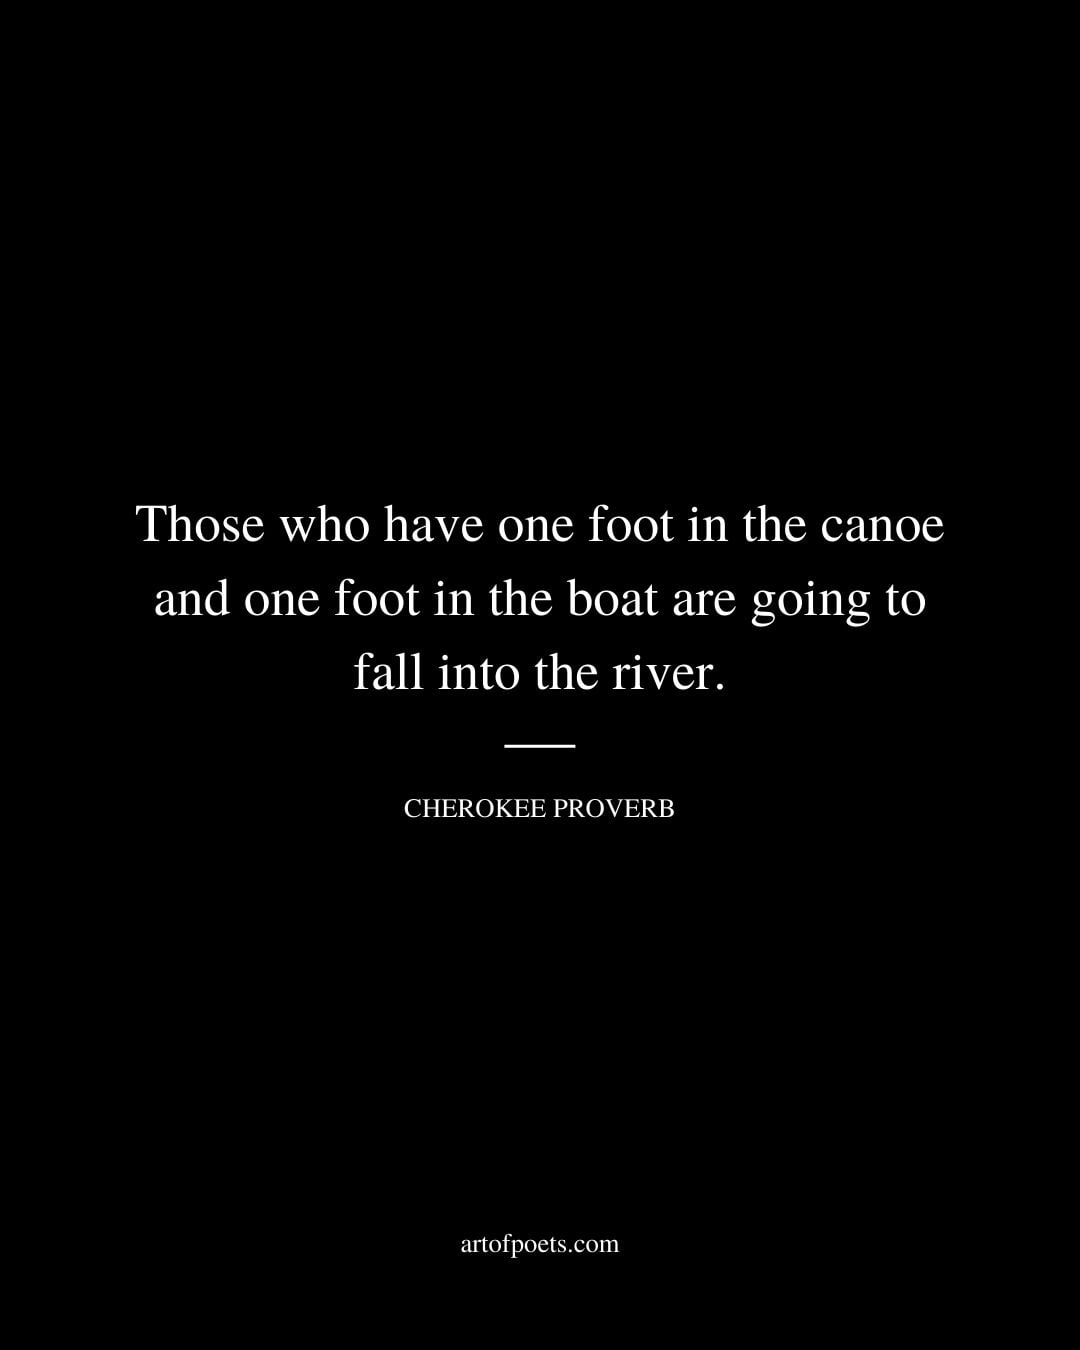 Those who have one foot in the canoe and one foot in the boat are going to fall into the river